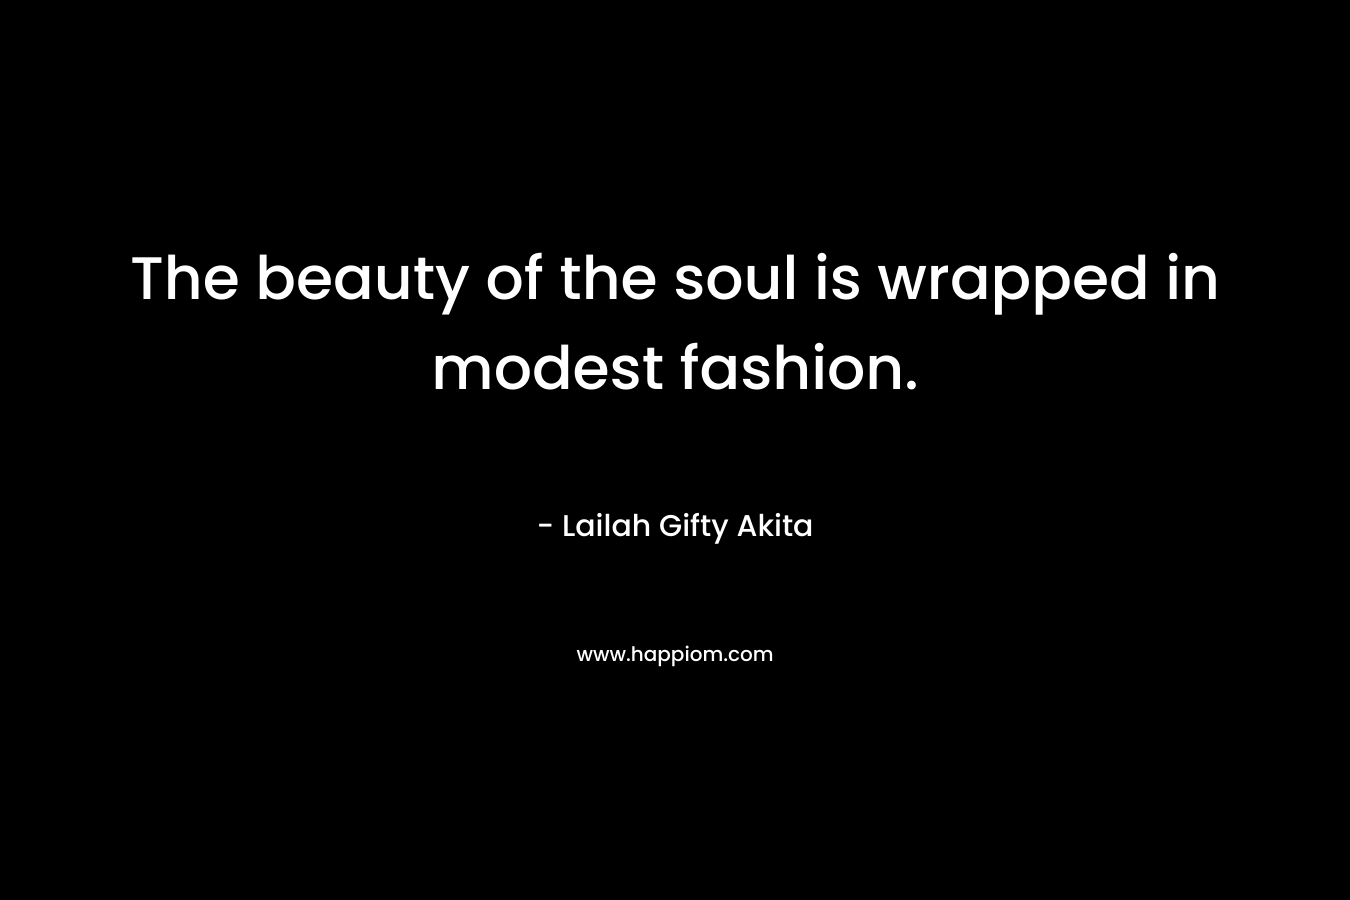 The beauty of the soul is wrapped in modest fashion.